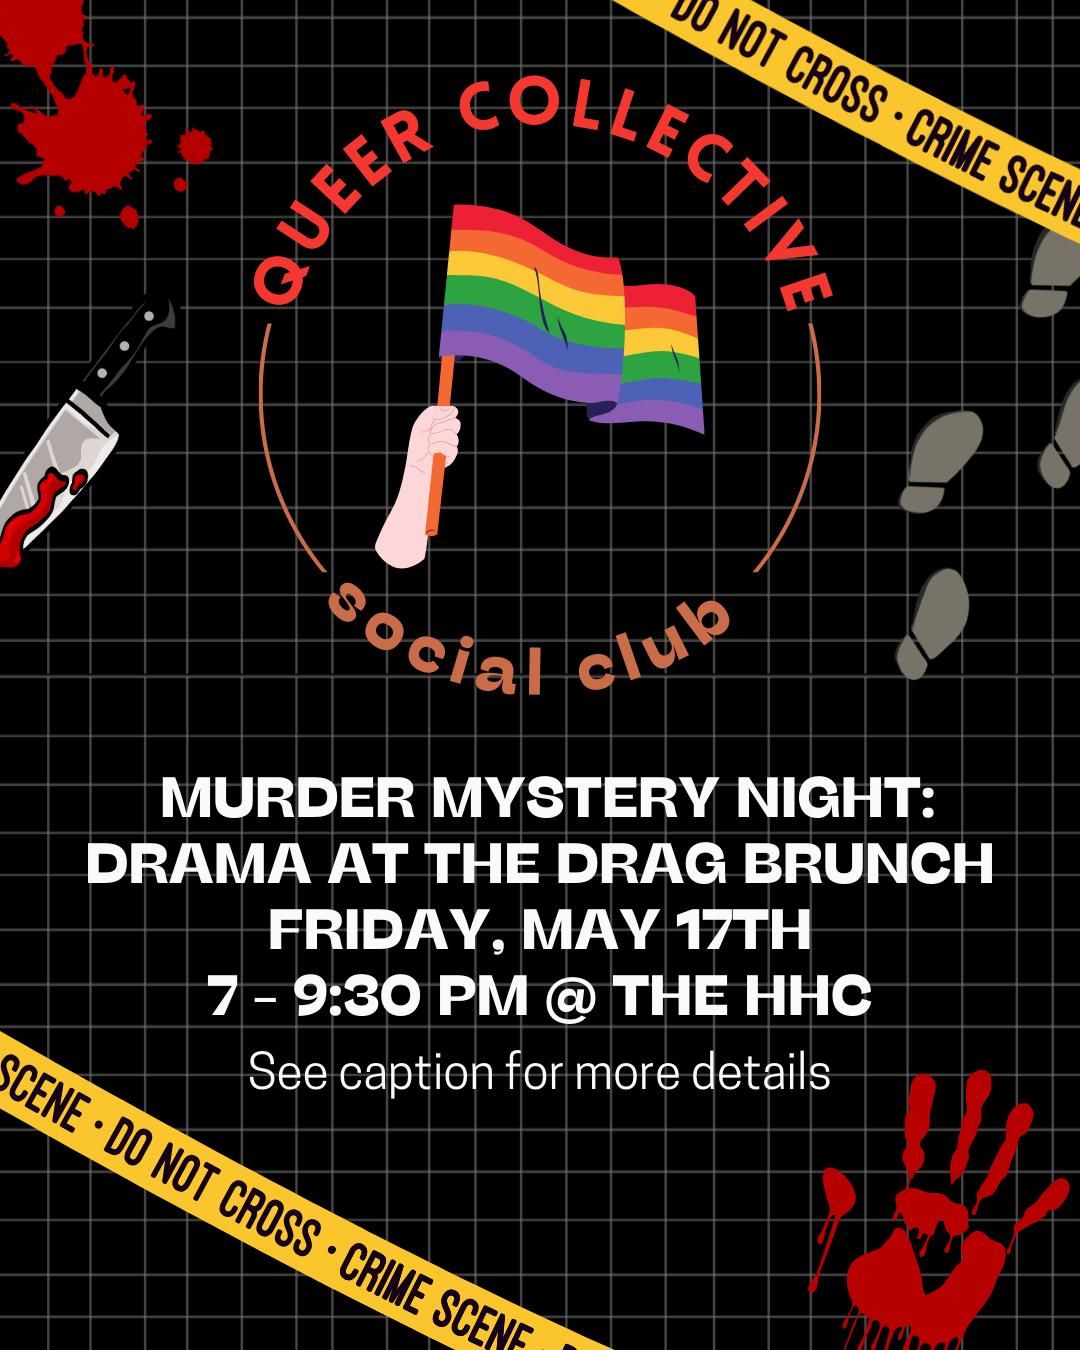 Queer Collective: Murder Mystery Night "Drama at Drag Brunch"